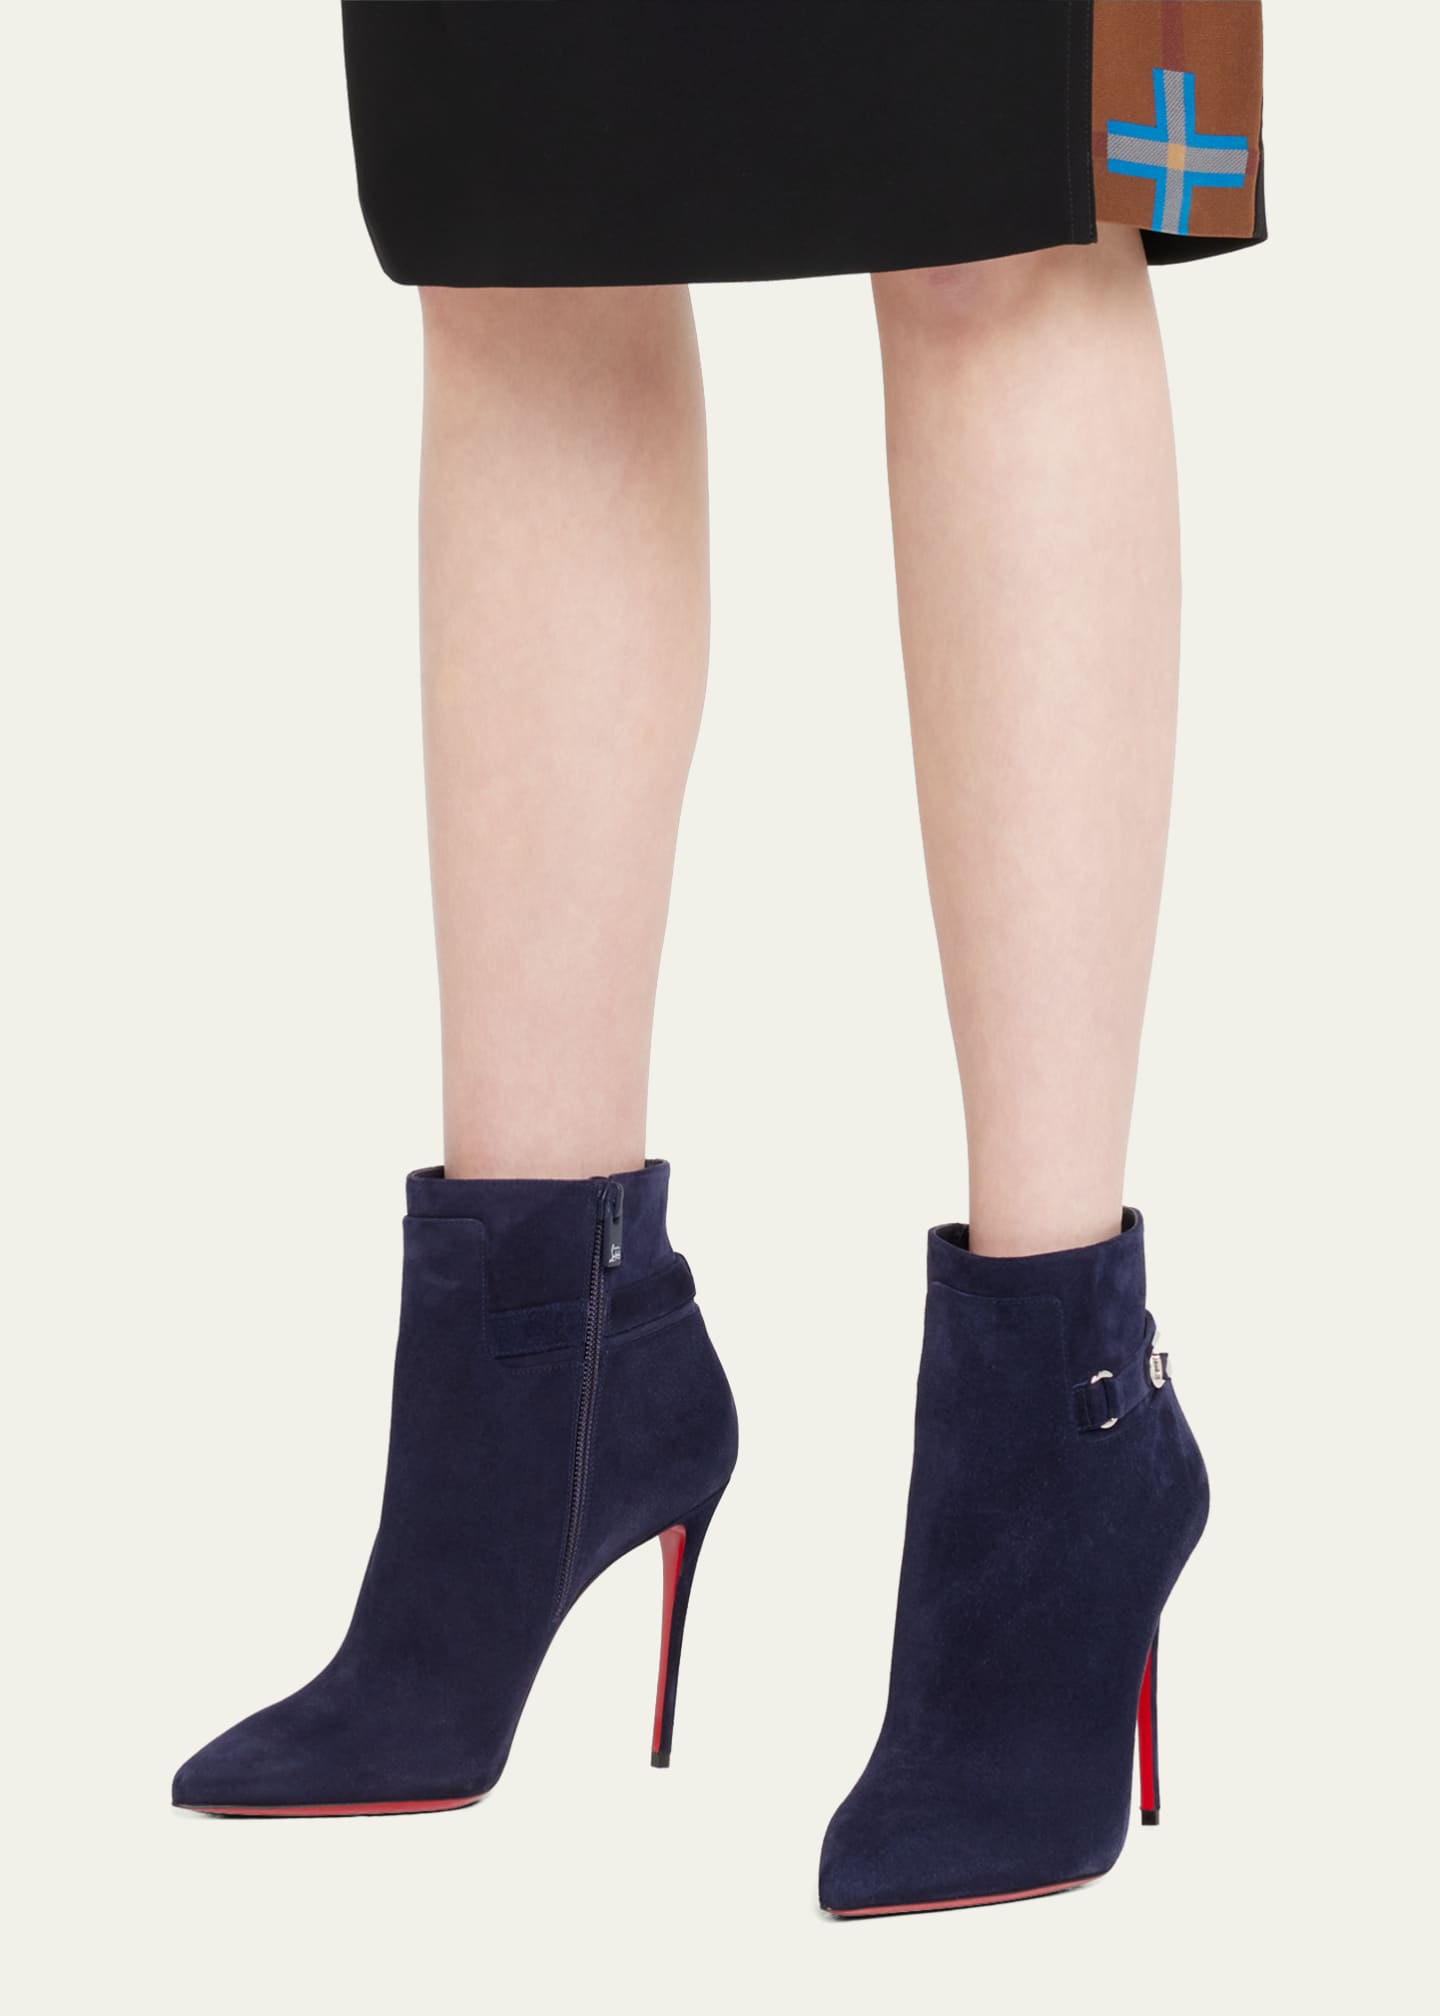 Christian Louboutin Lock So Kate Suede Red Sole Booties - Bergdorf Goodman